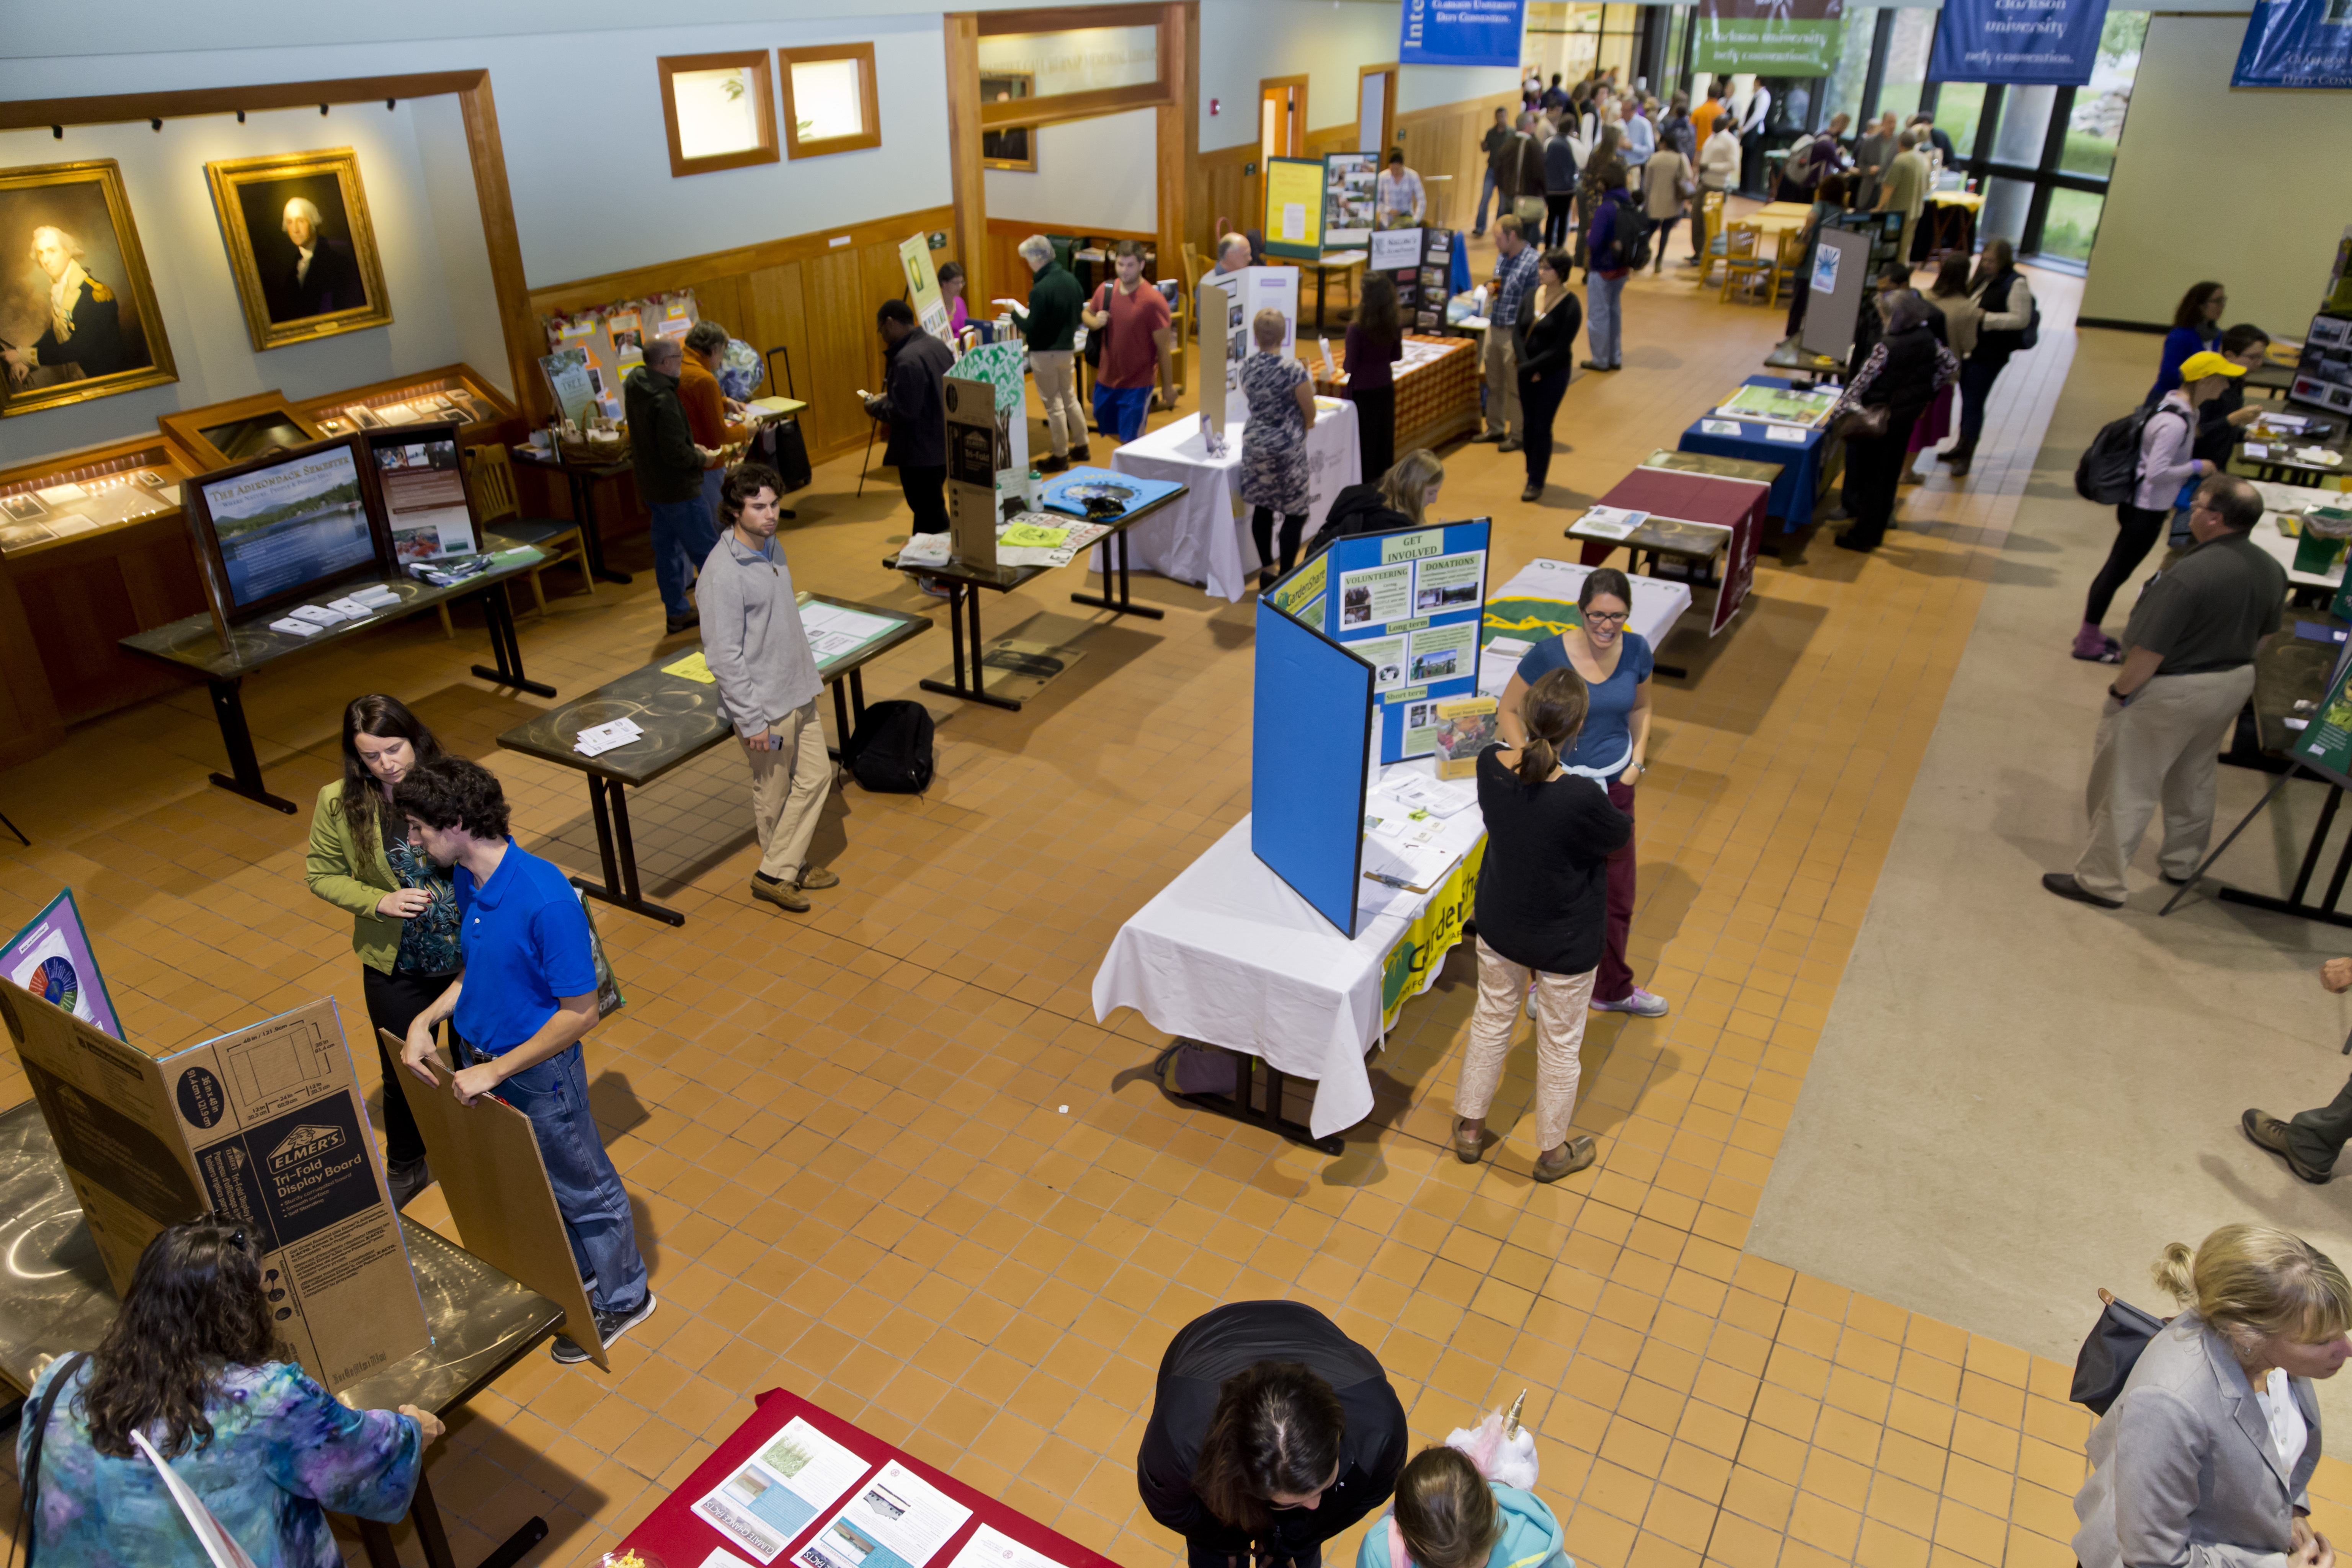 An overhead view of several students set up with poster presentations at tables for viewing by attendees.